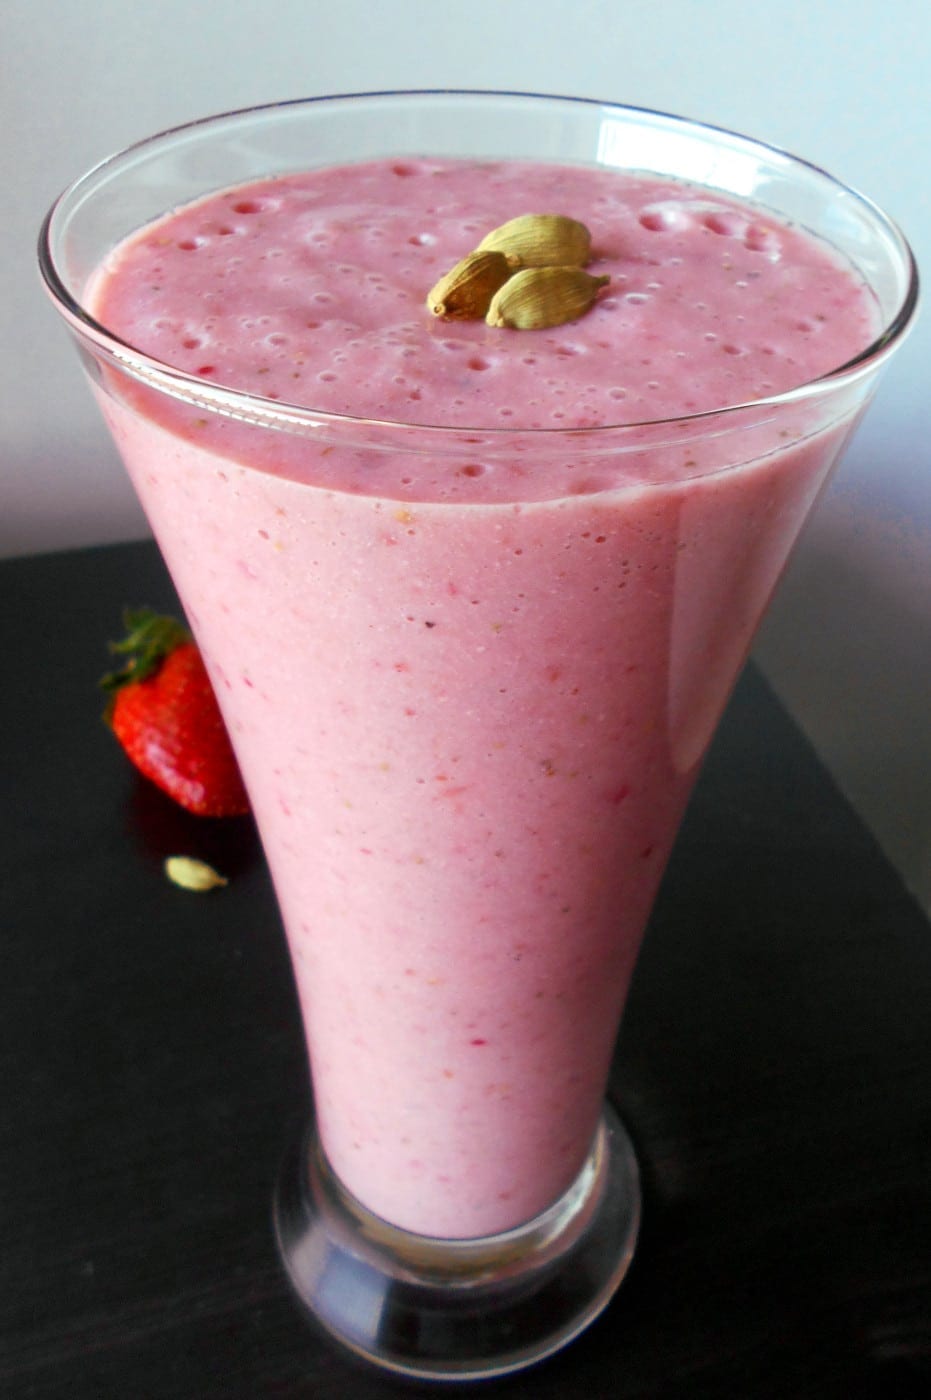 Front view of a tall glass filled with tomatillo strawberry smoothie